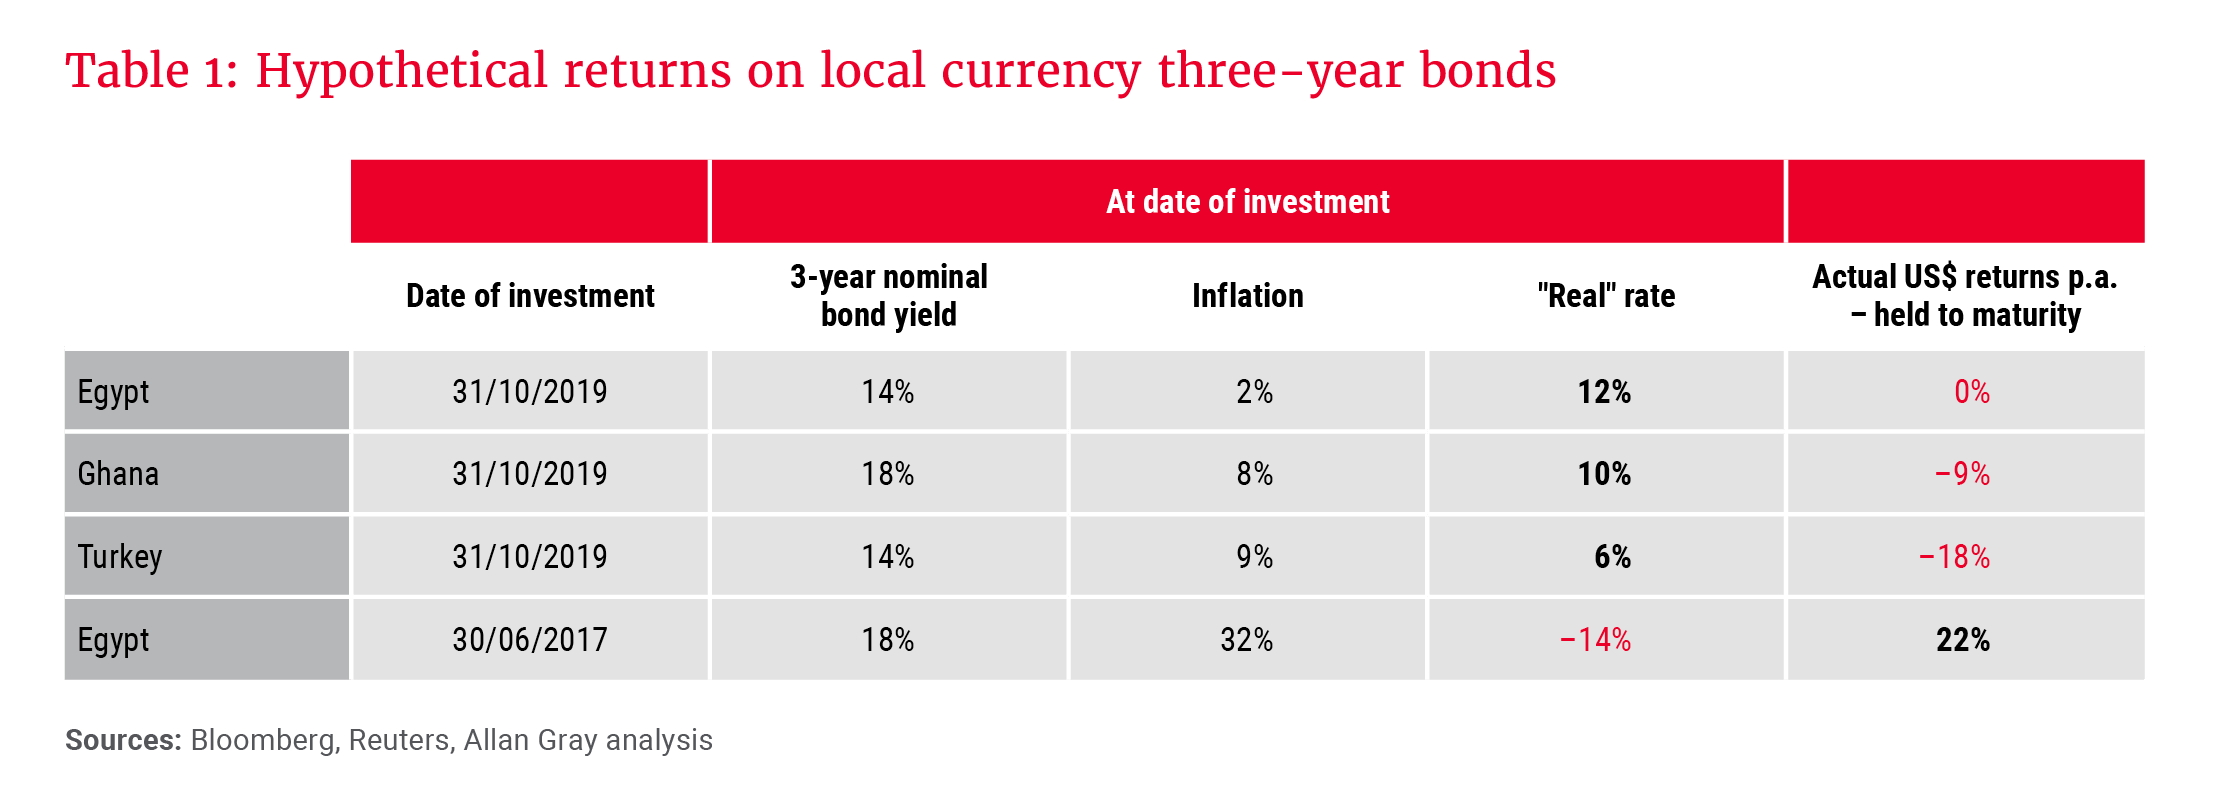 Table 1_Hypothetical returns on local currency three-year bonds